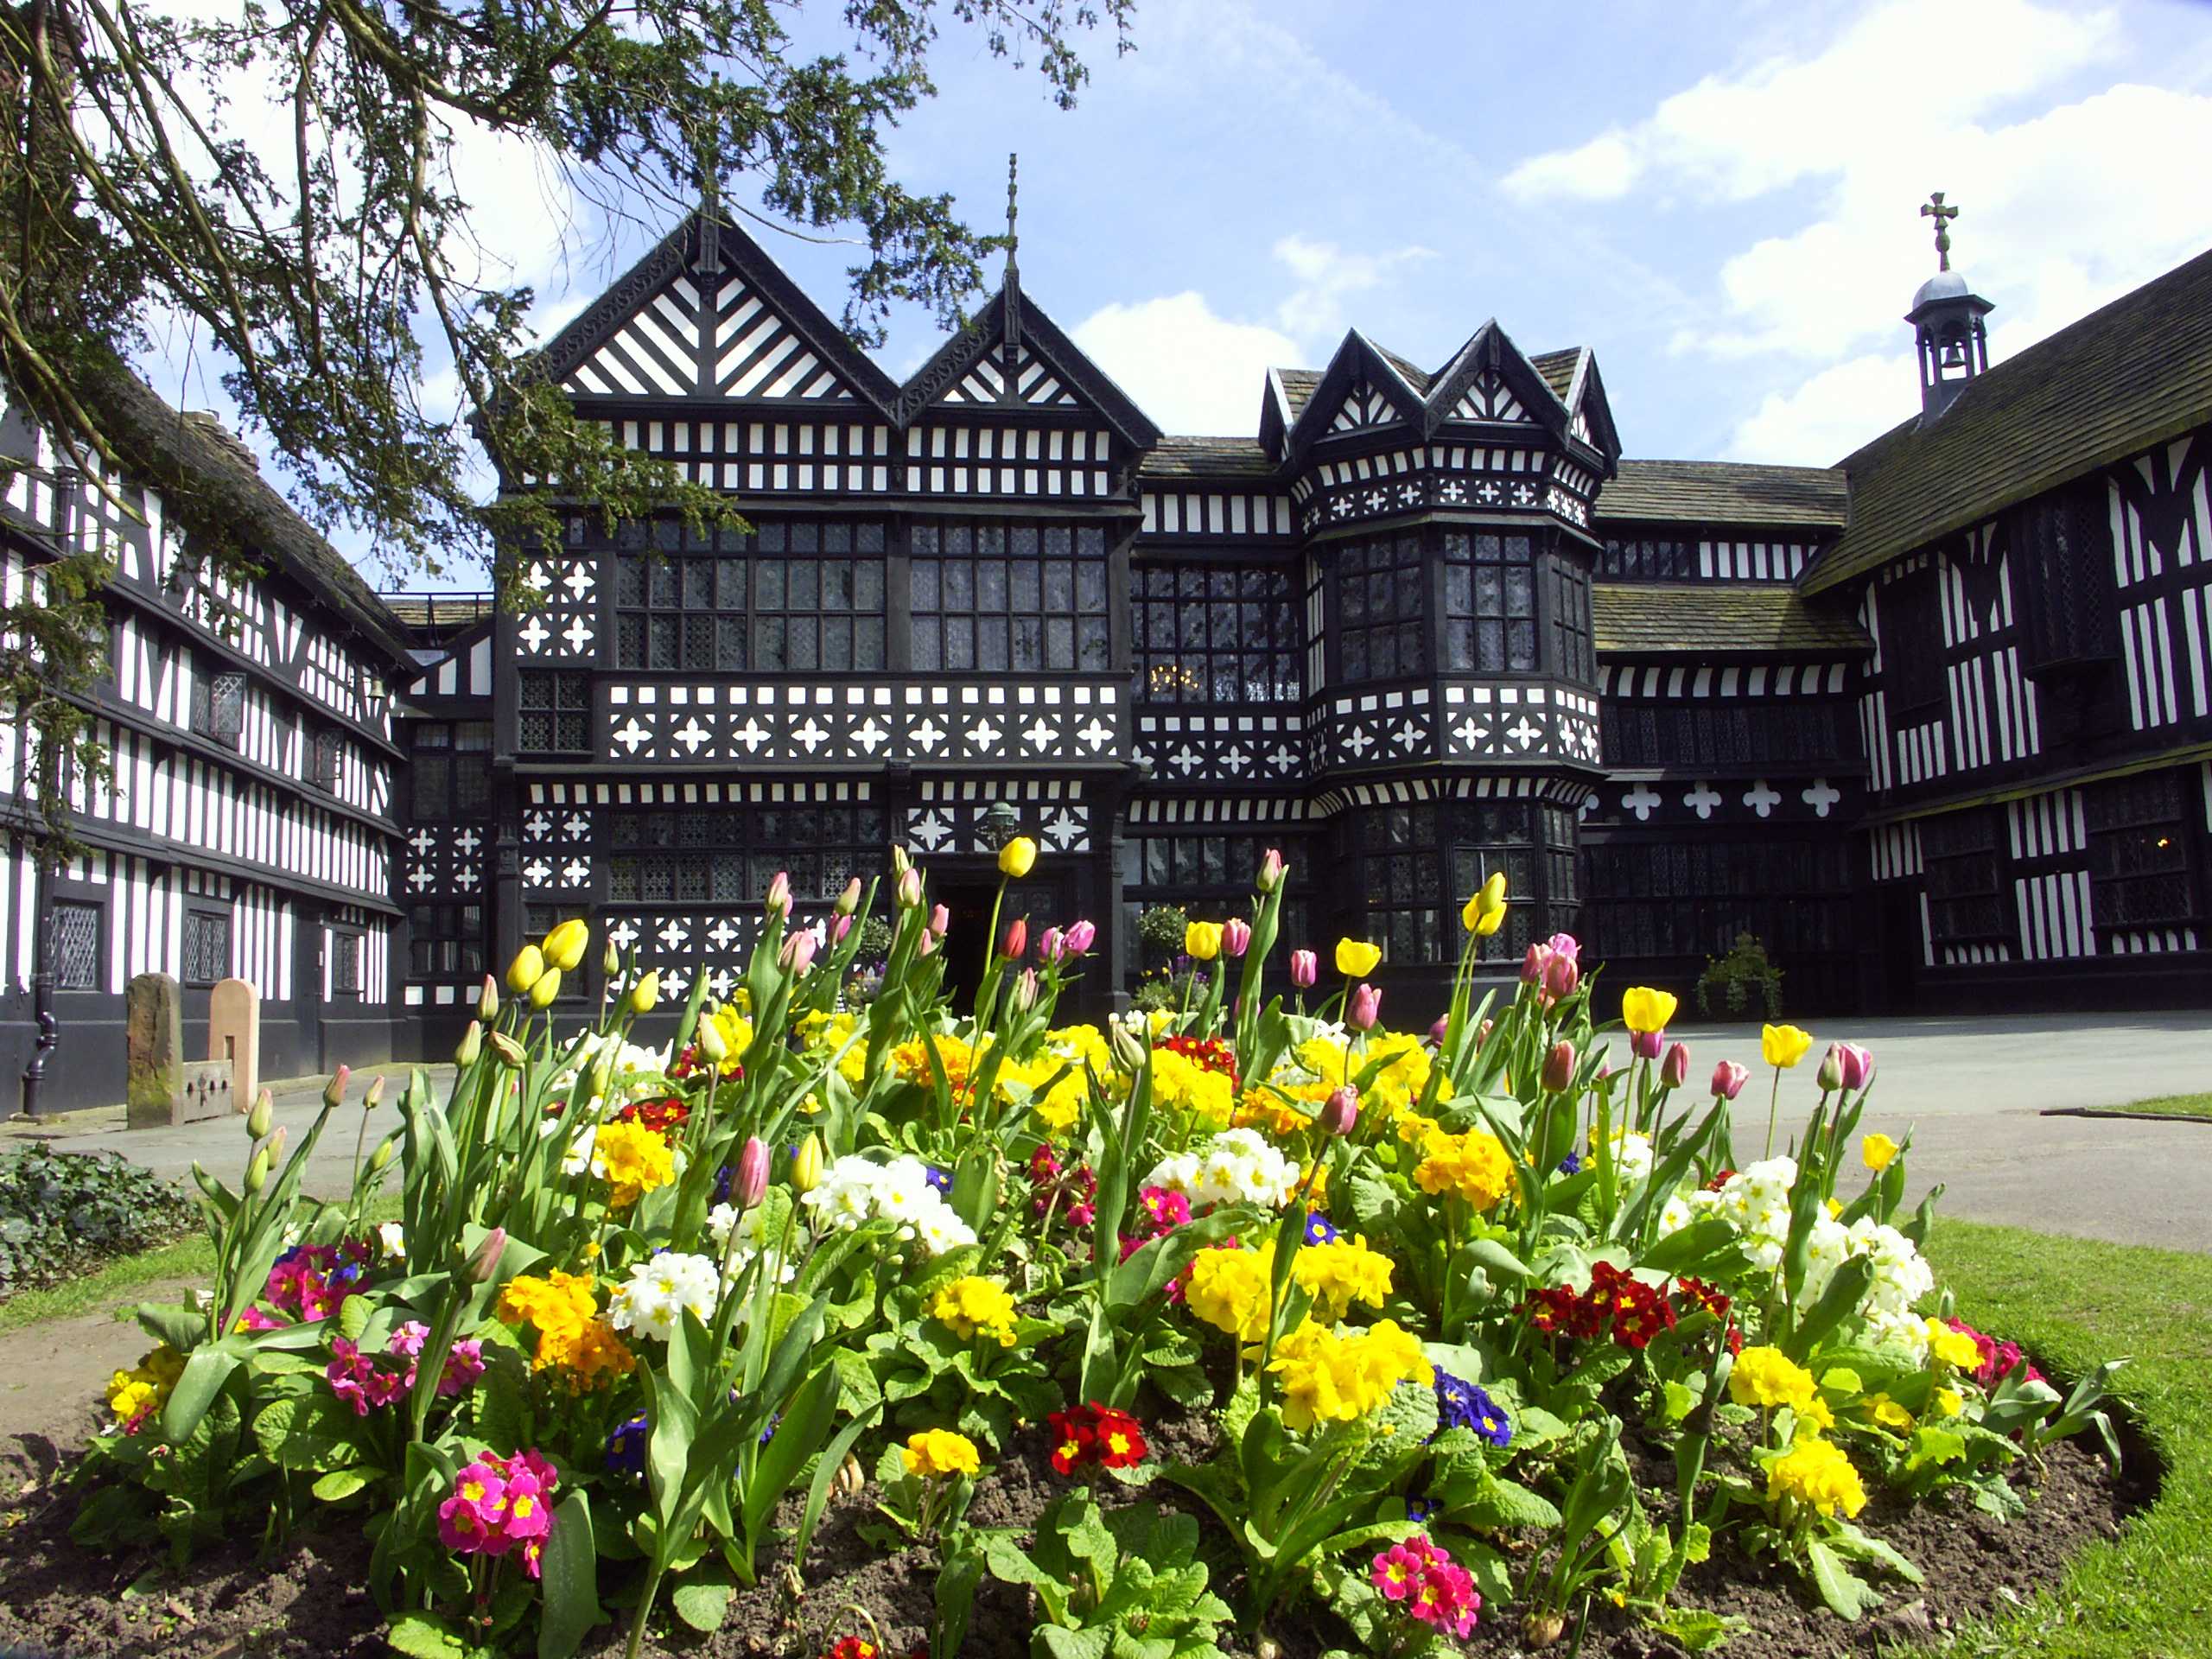 Bramall Hall, Greater Manchester, England